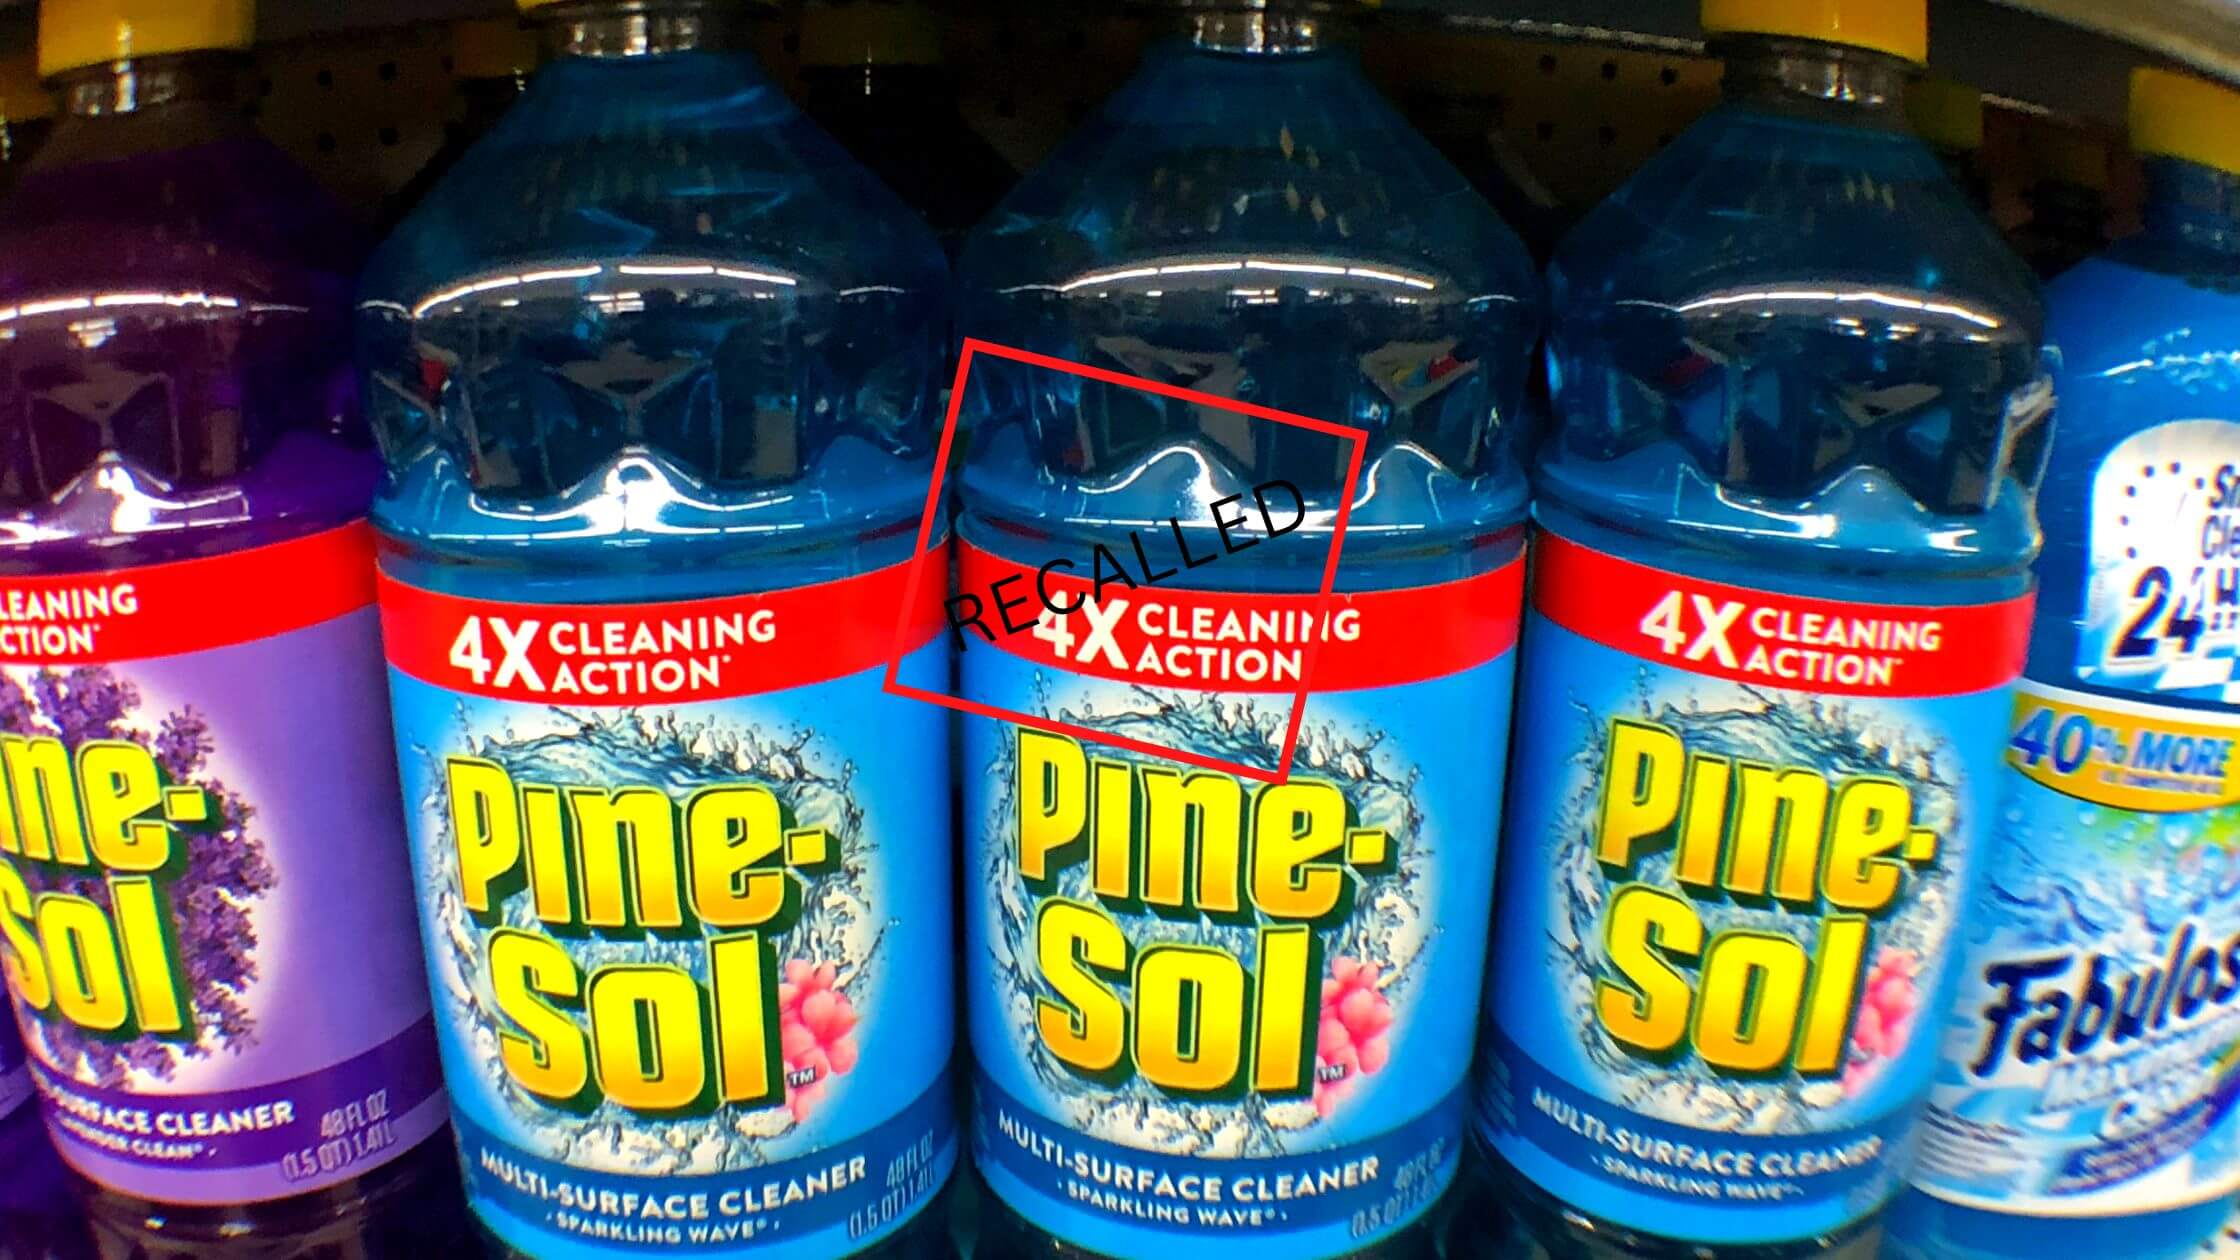 37 Million Bottles Of Pine-Sol Bottles Recalled By Clorox As Bacteria May Be Present